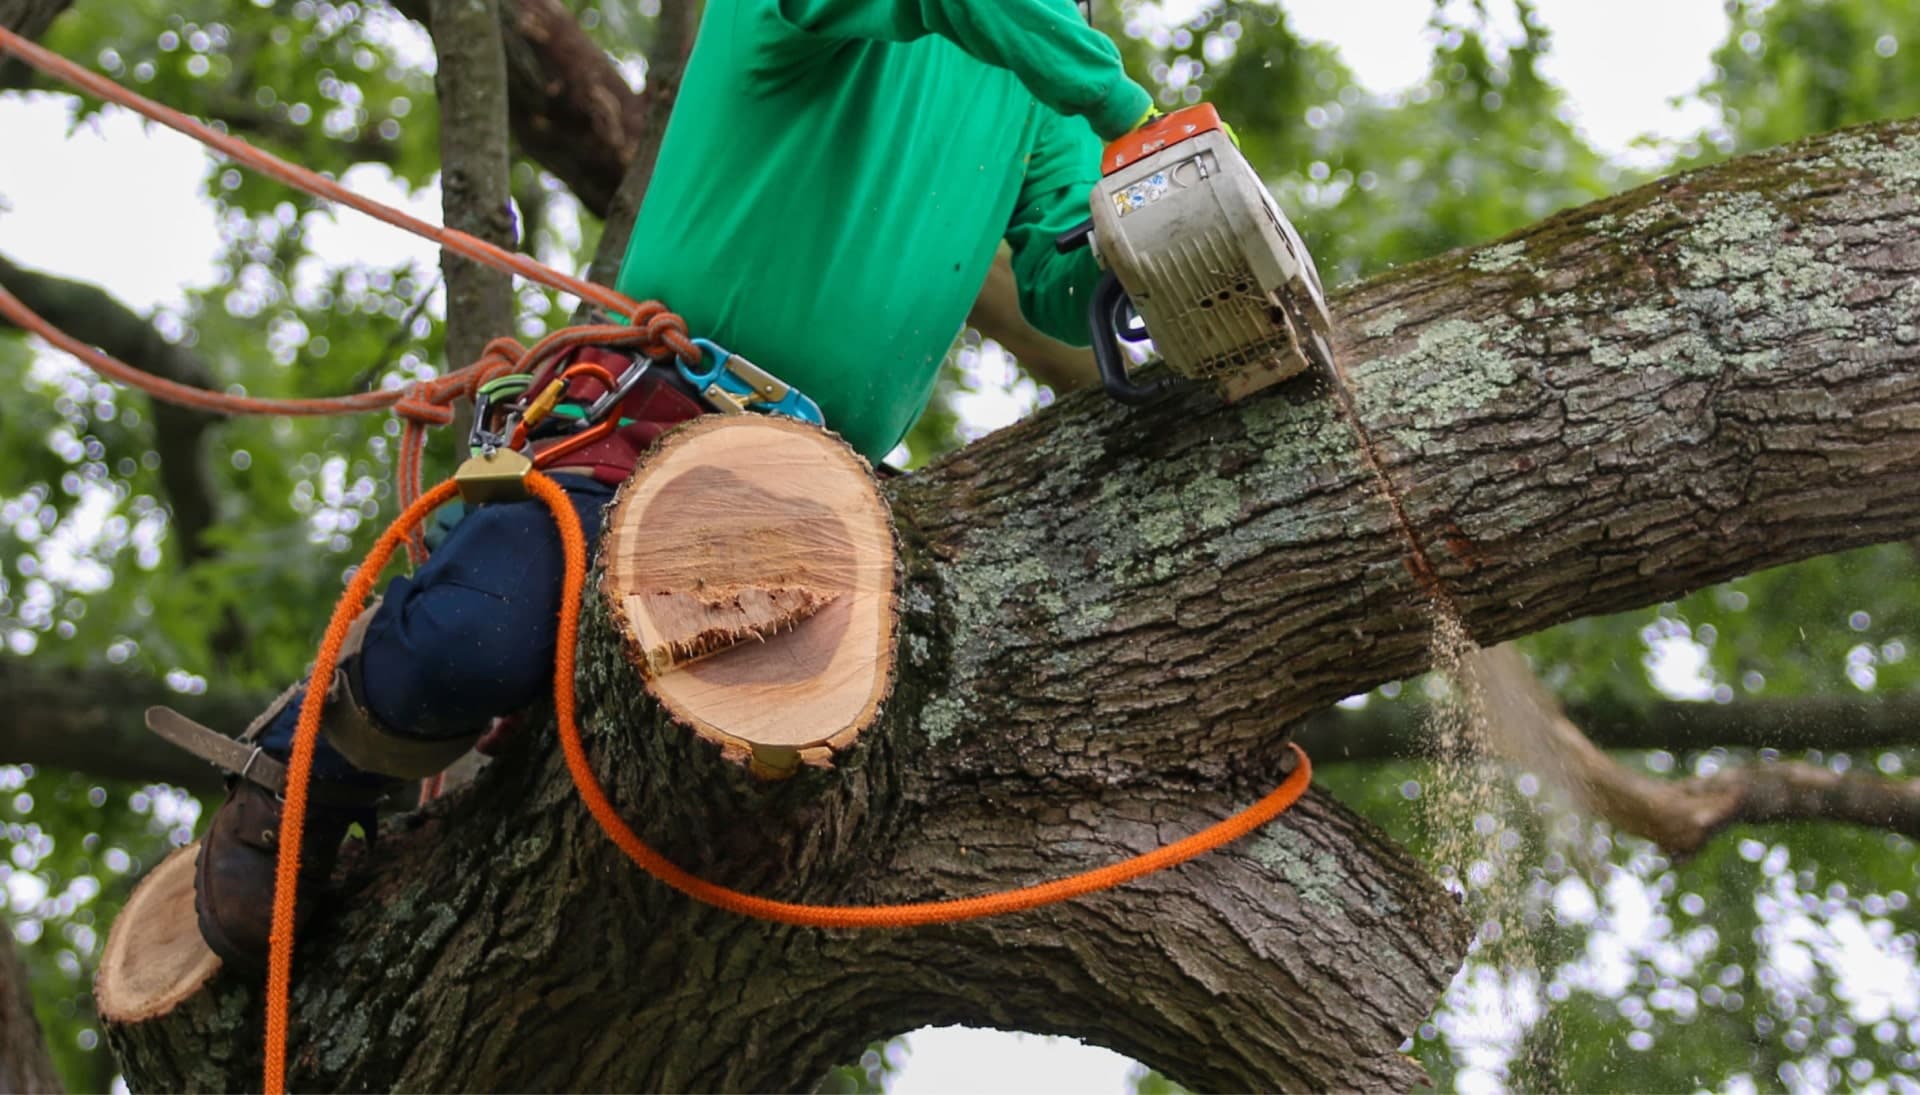 Shed your worries away with best tree removal in Fremont